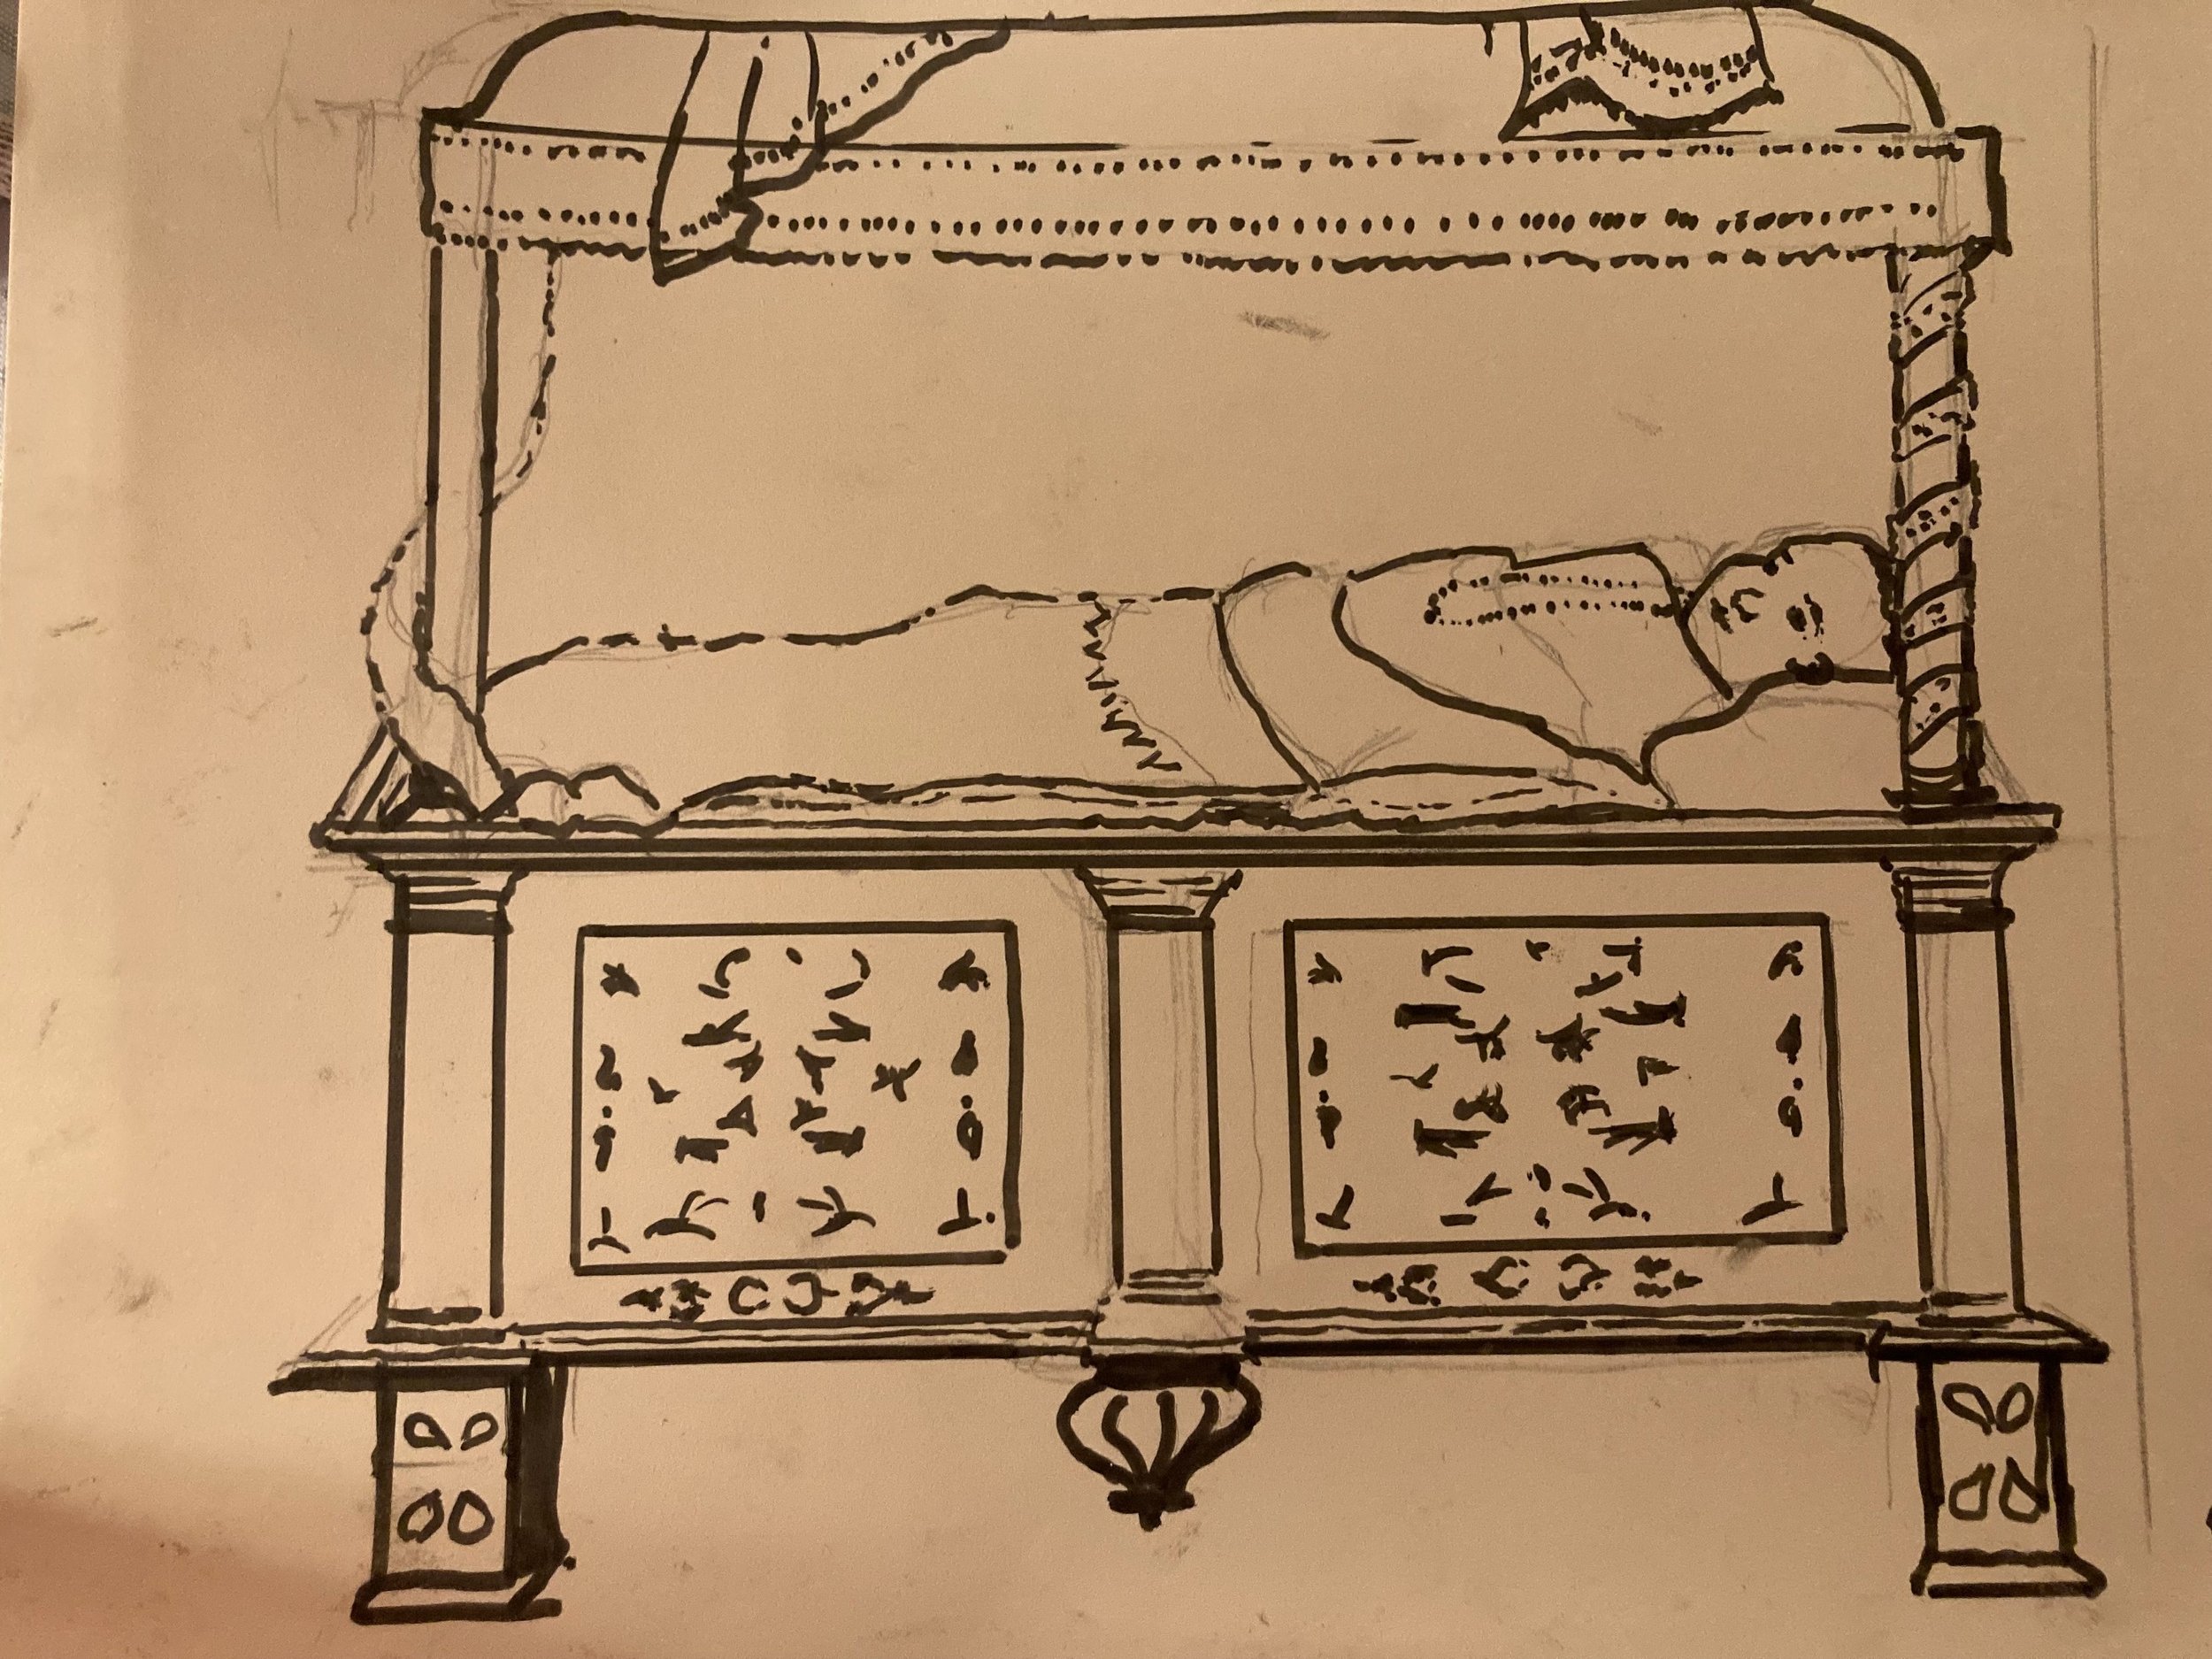 Emilie's drawing on zyfuse paper of Lavinia Fontana's Child in a Cradle